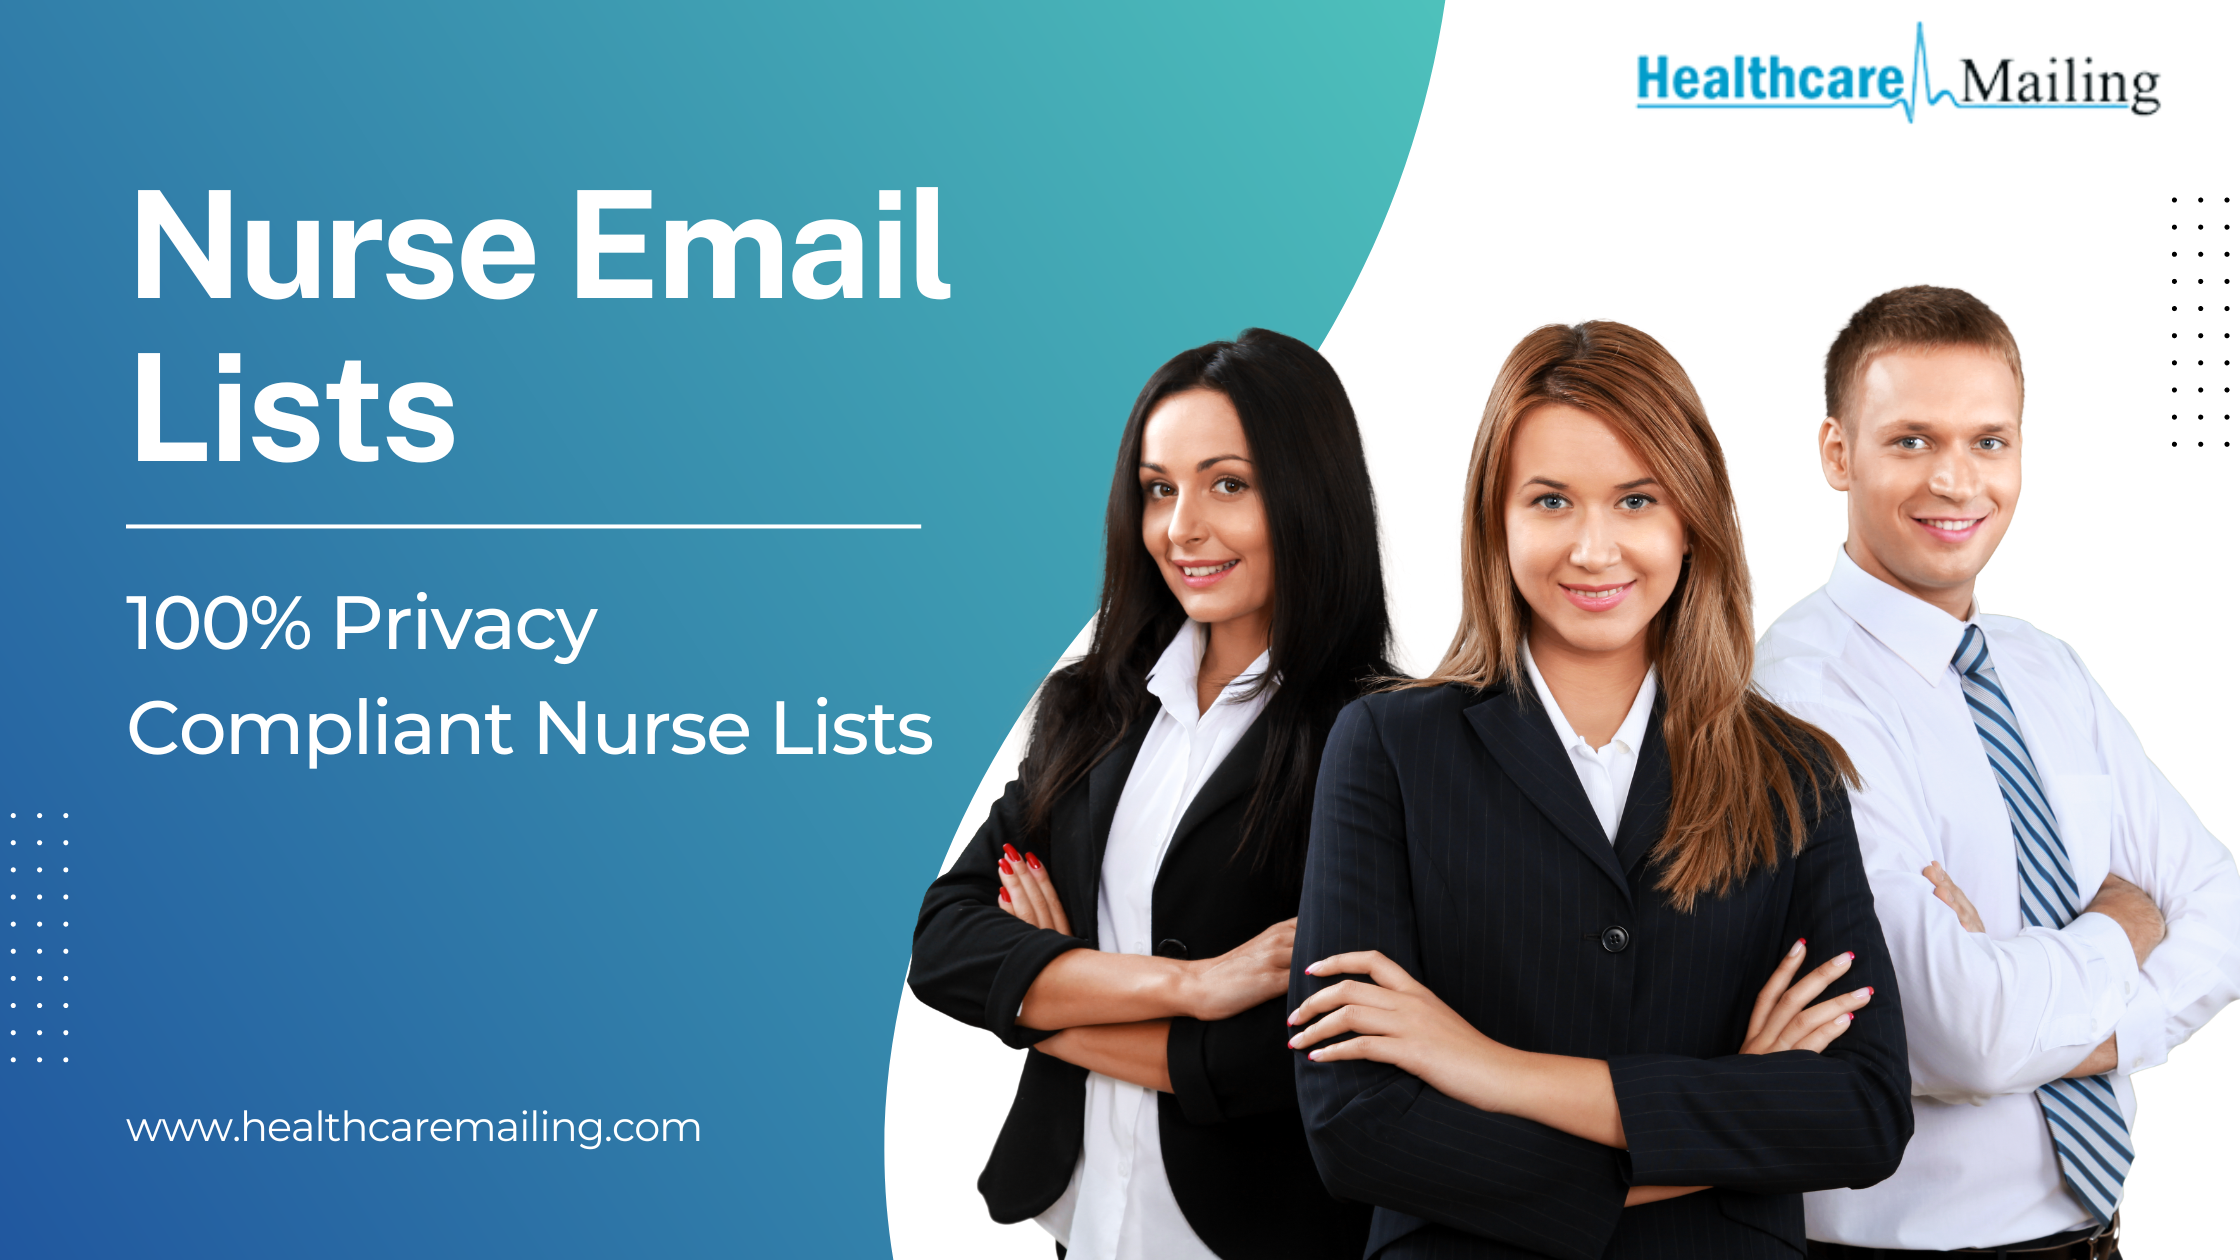 Nurses Email List: Reach Out to Over 1 Million Nursing Professionals